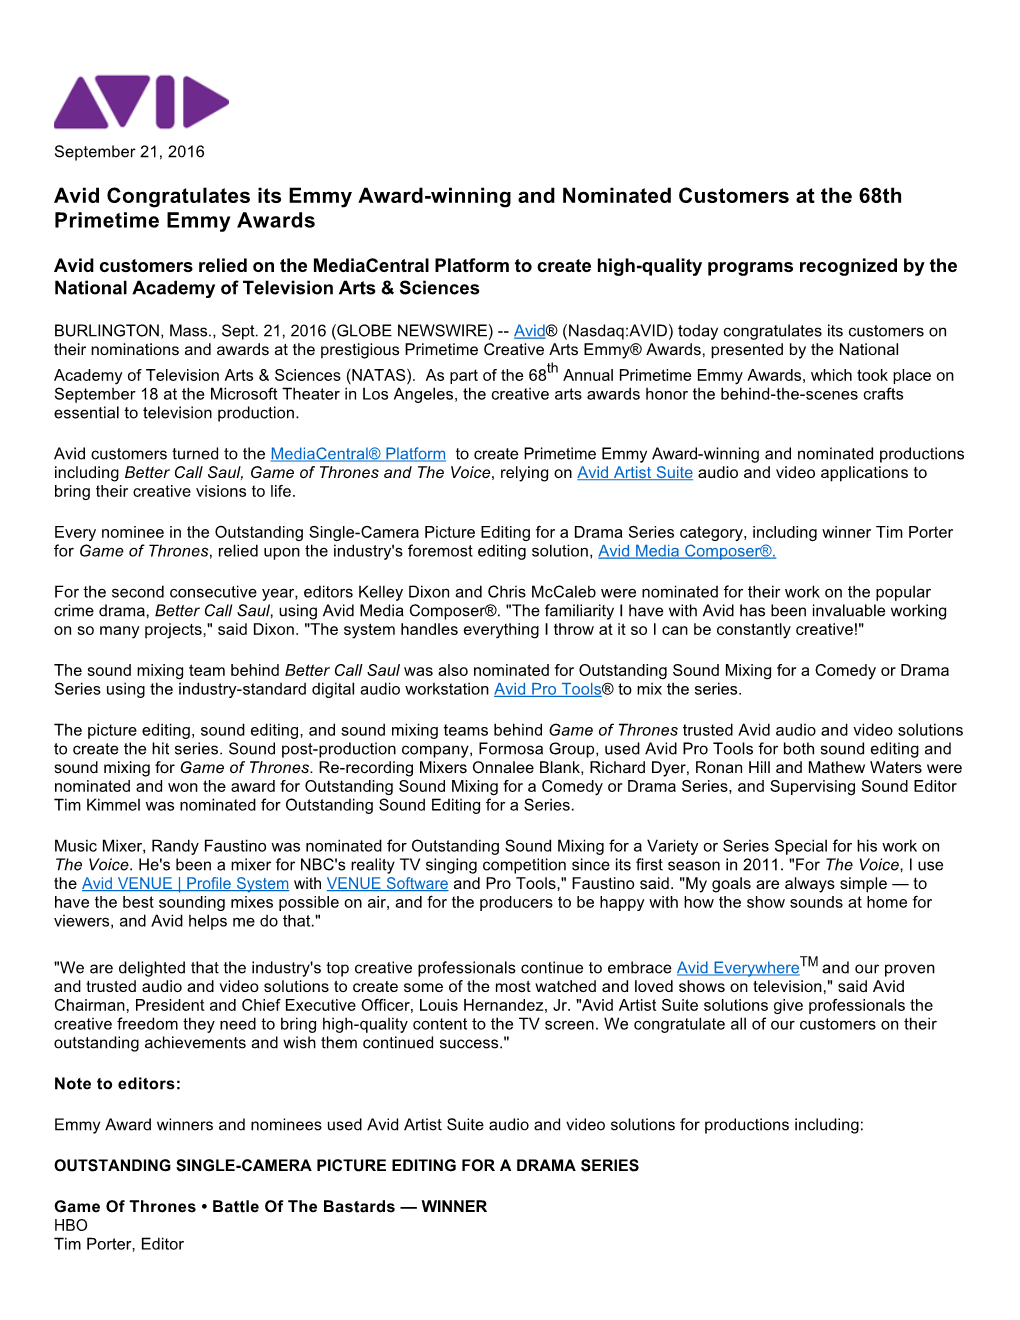 Avid Congratulates Its Emmy Award-Winning and Nominated Customers at the 68Th Primetime Emmy Awards